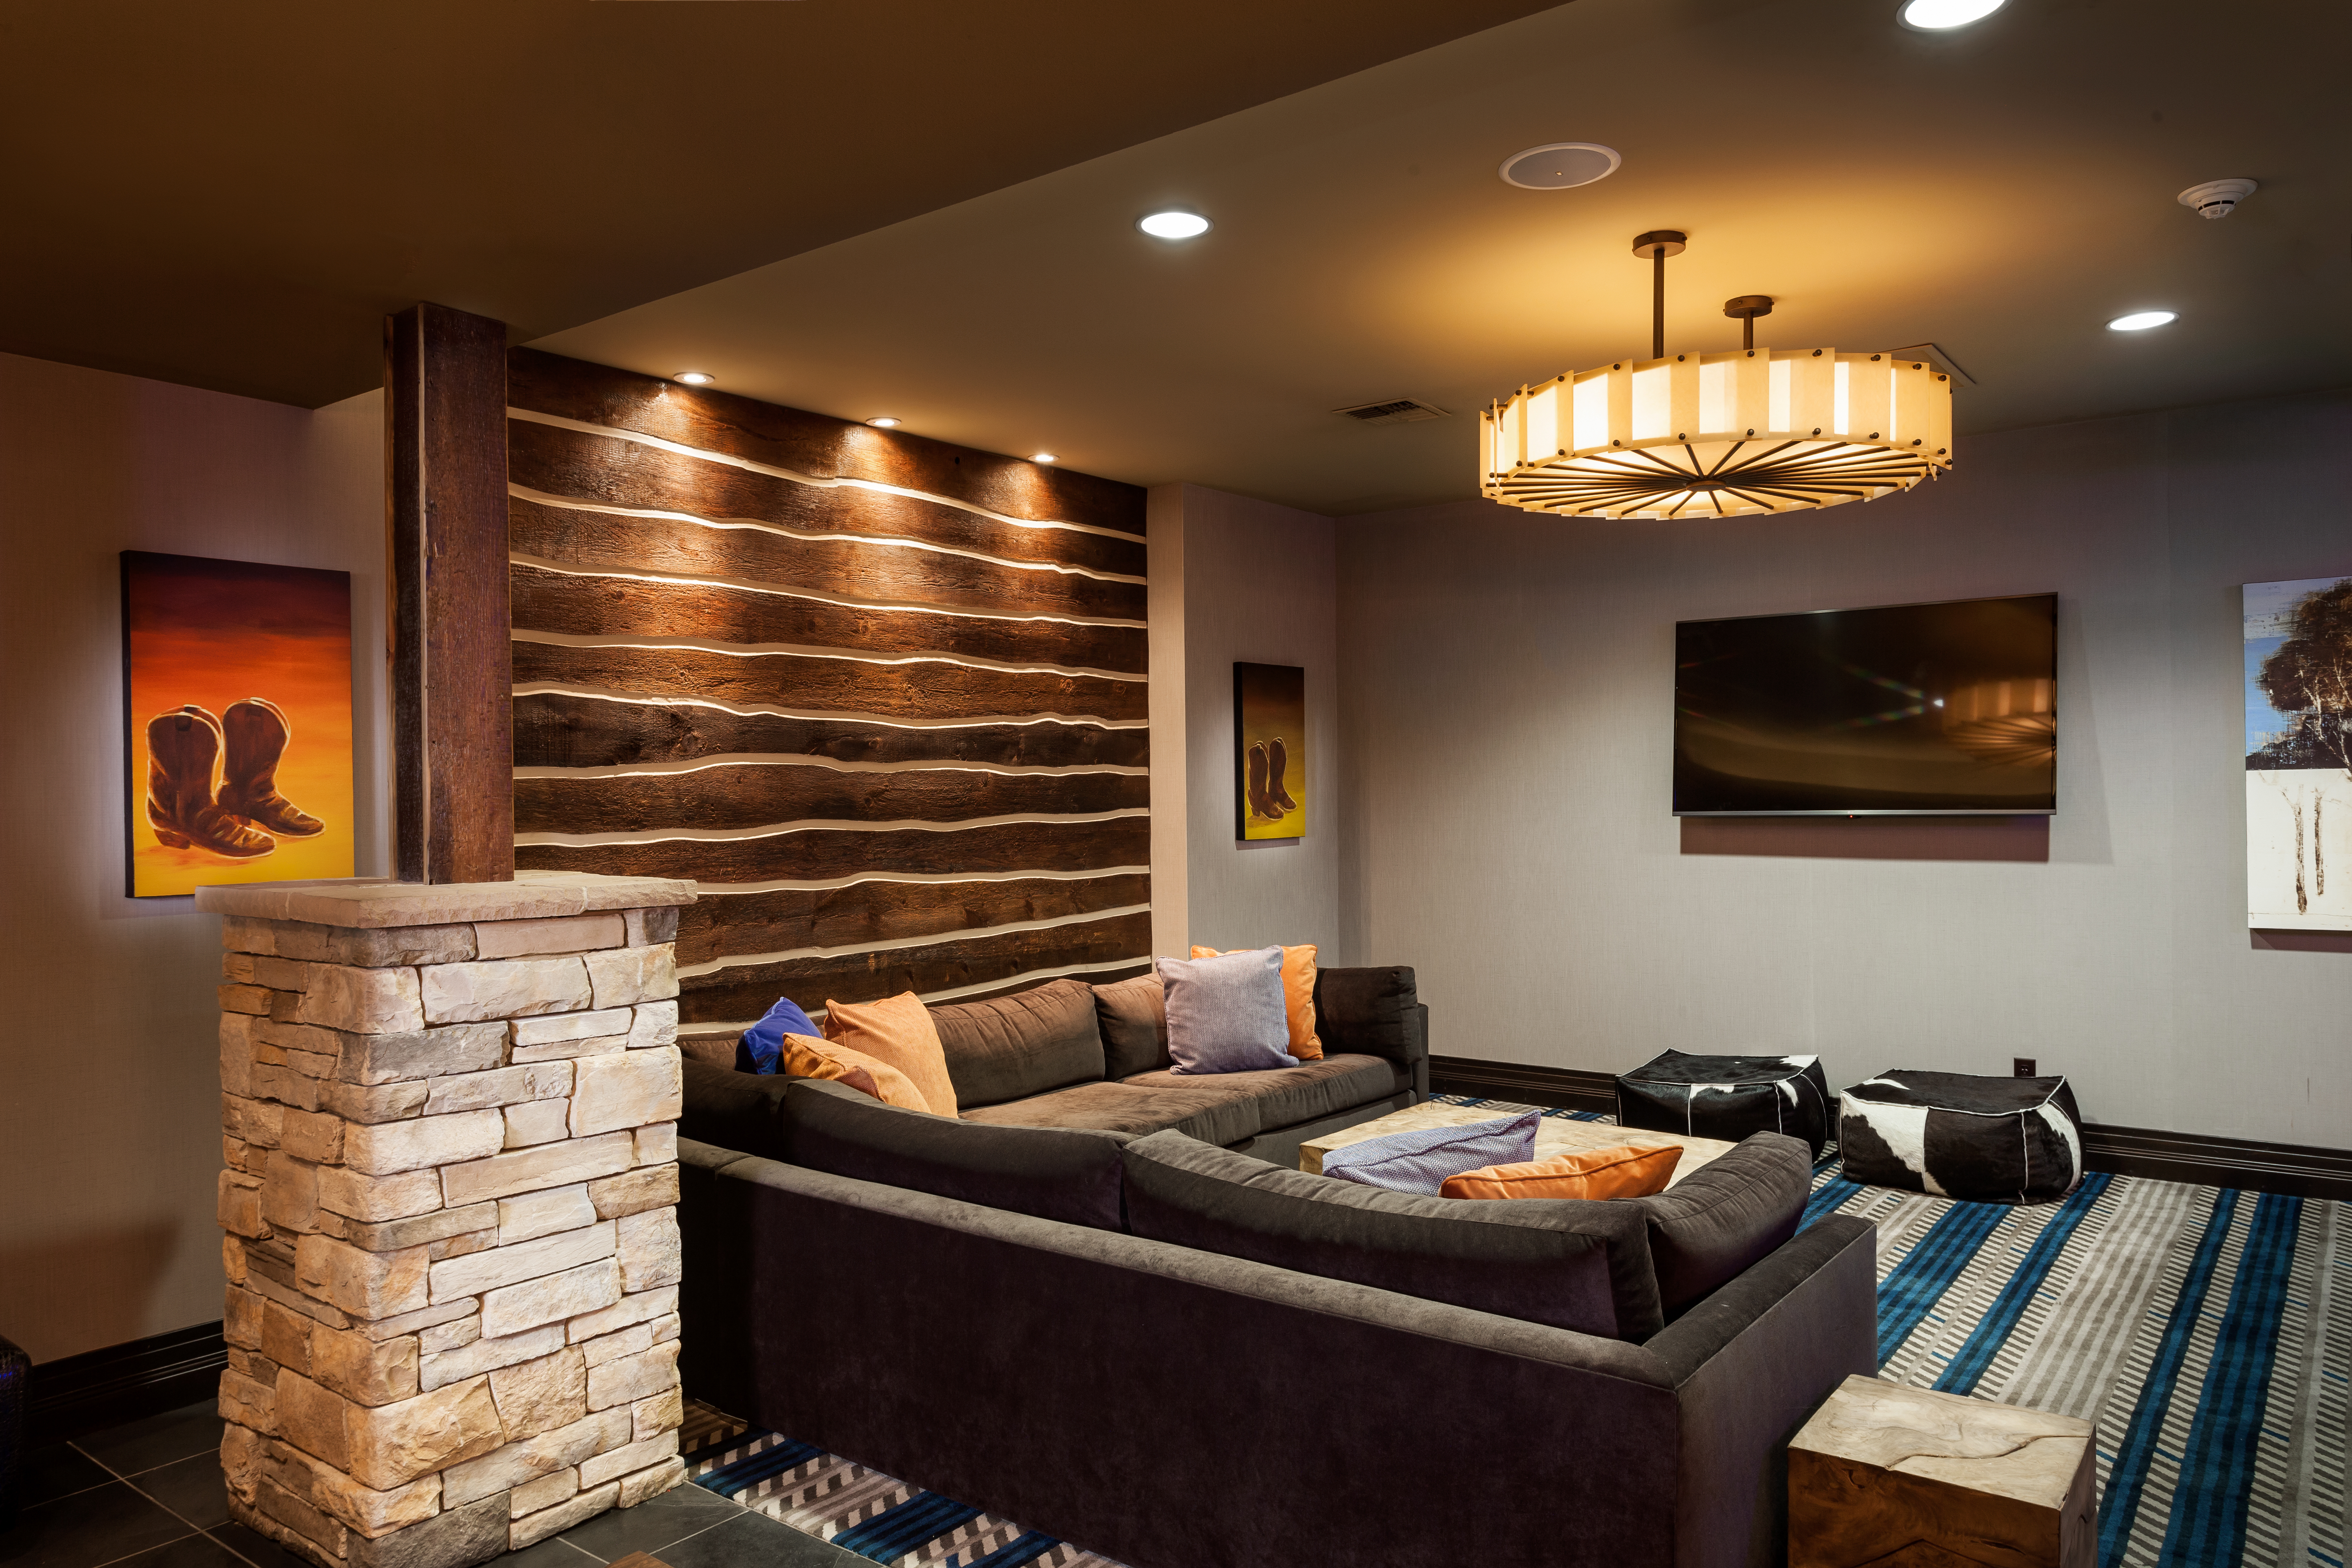 Wall Art, Casual Sectional Sofa and TV in Bar Lounge Area